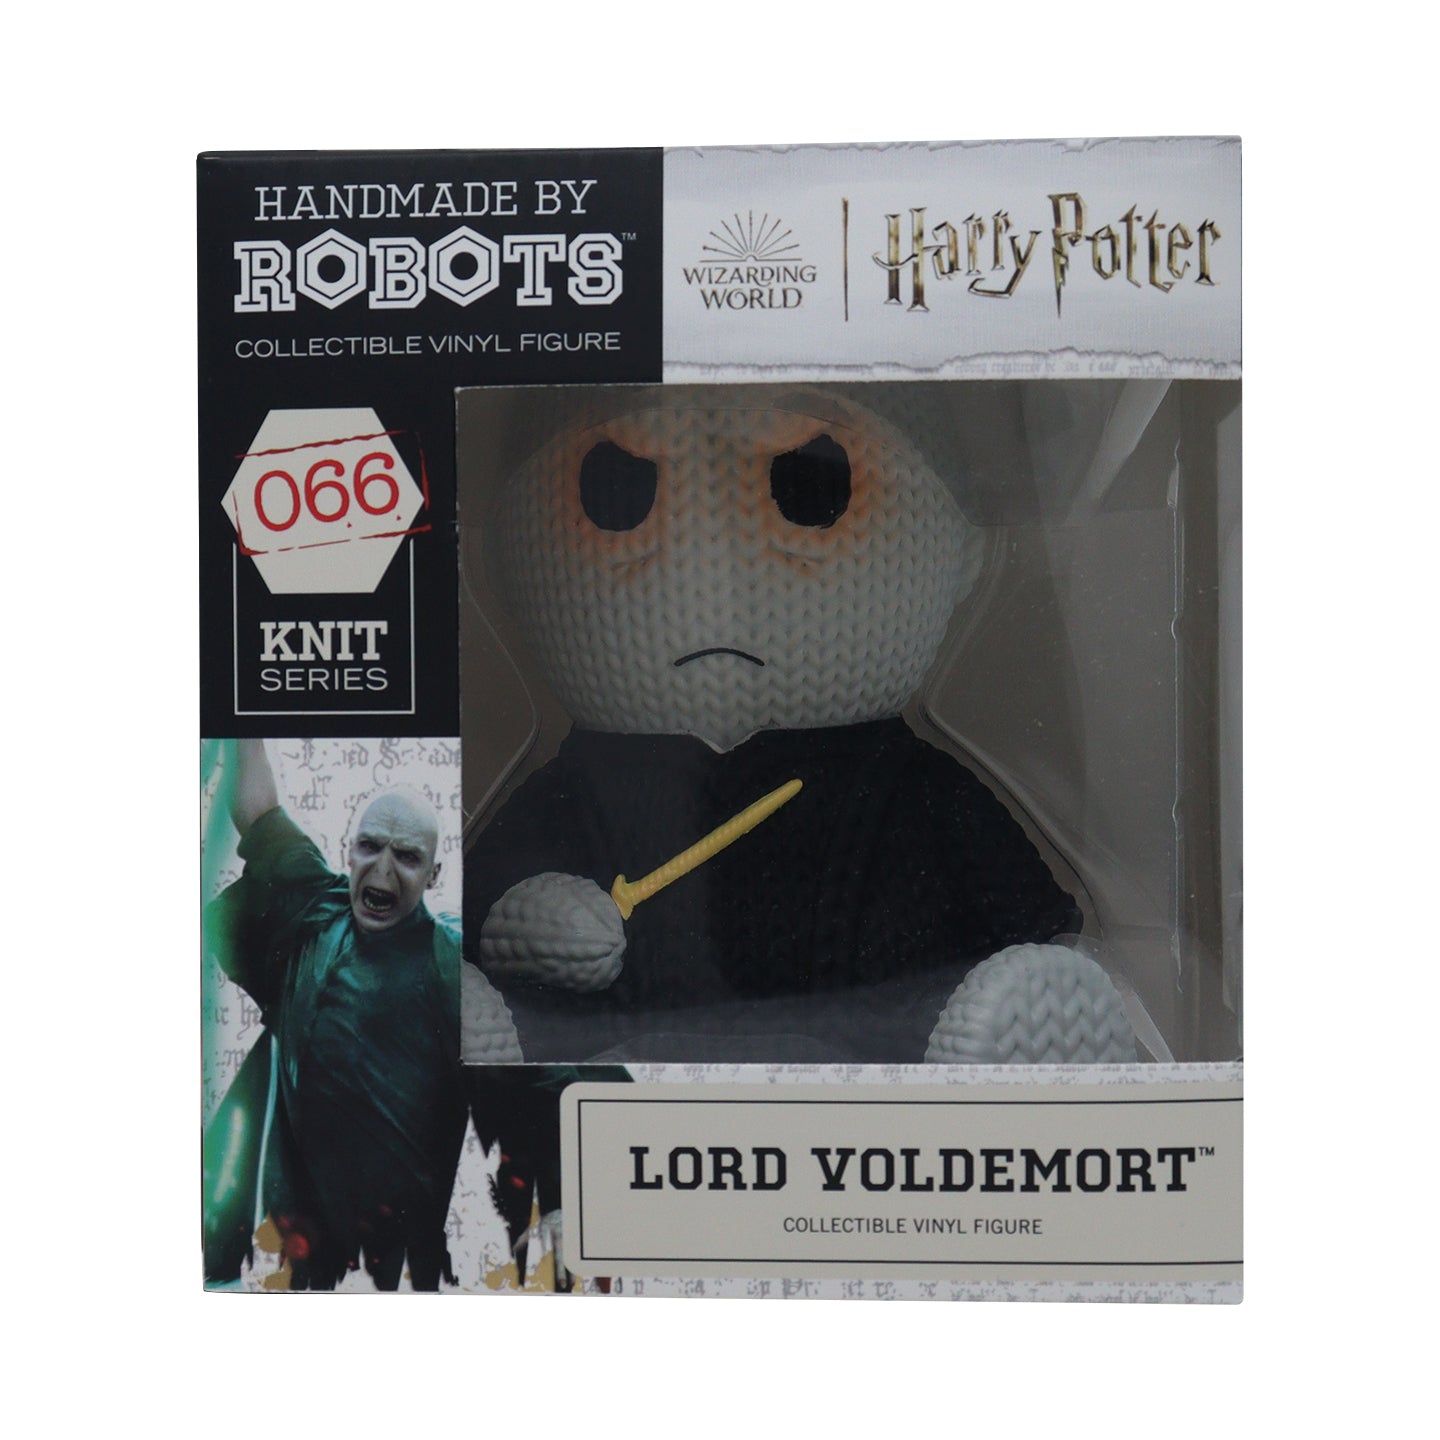 Harry Potter - Lord Voldemort Collectible Vinyl Figure from Handmade By Robots